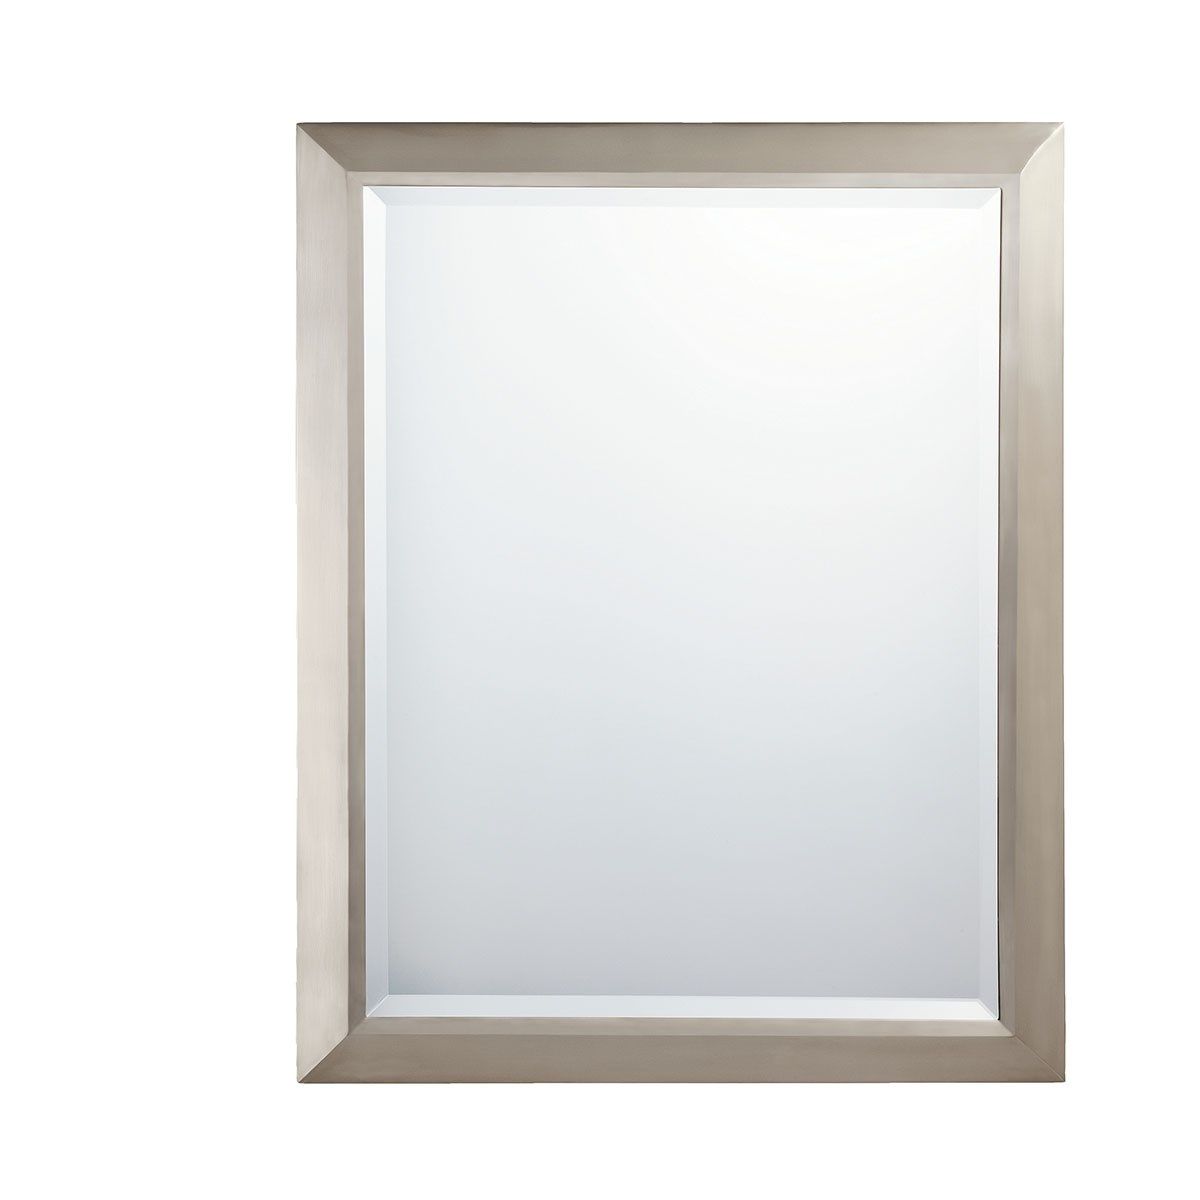 30 In. x 24 In. Wall Mirror - Bees Lighting